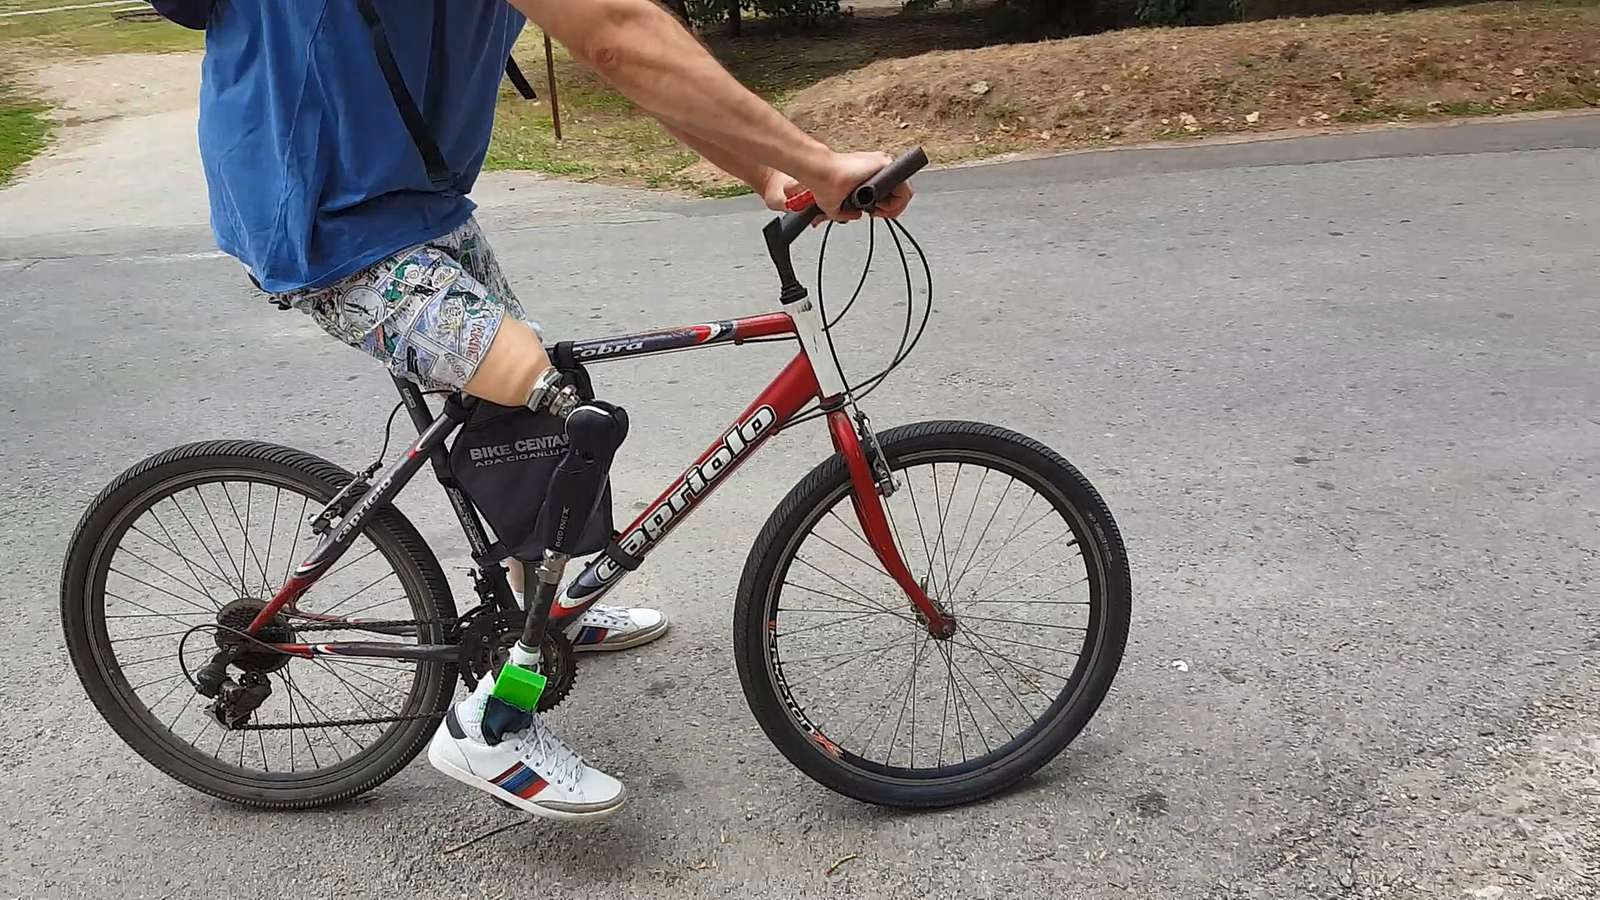 A man with a prosthetic leg riding a bicycle